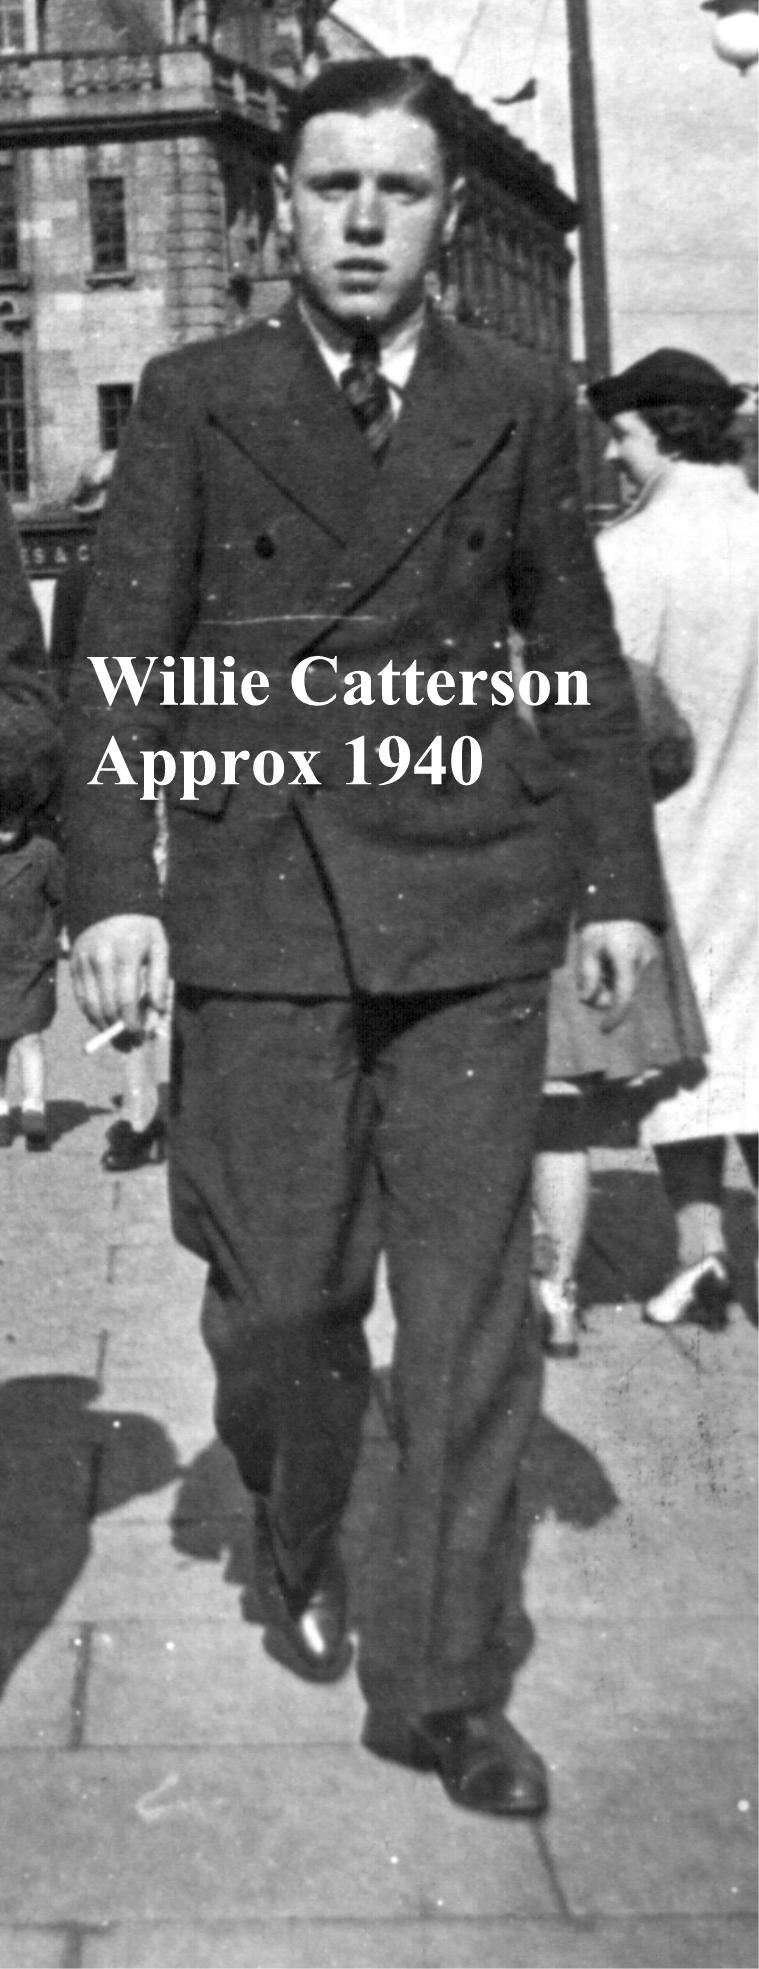 Willie Catterson approx 1940